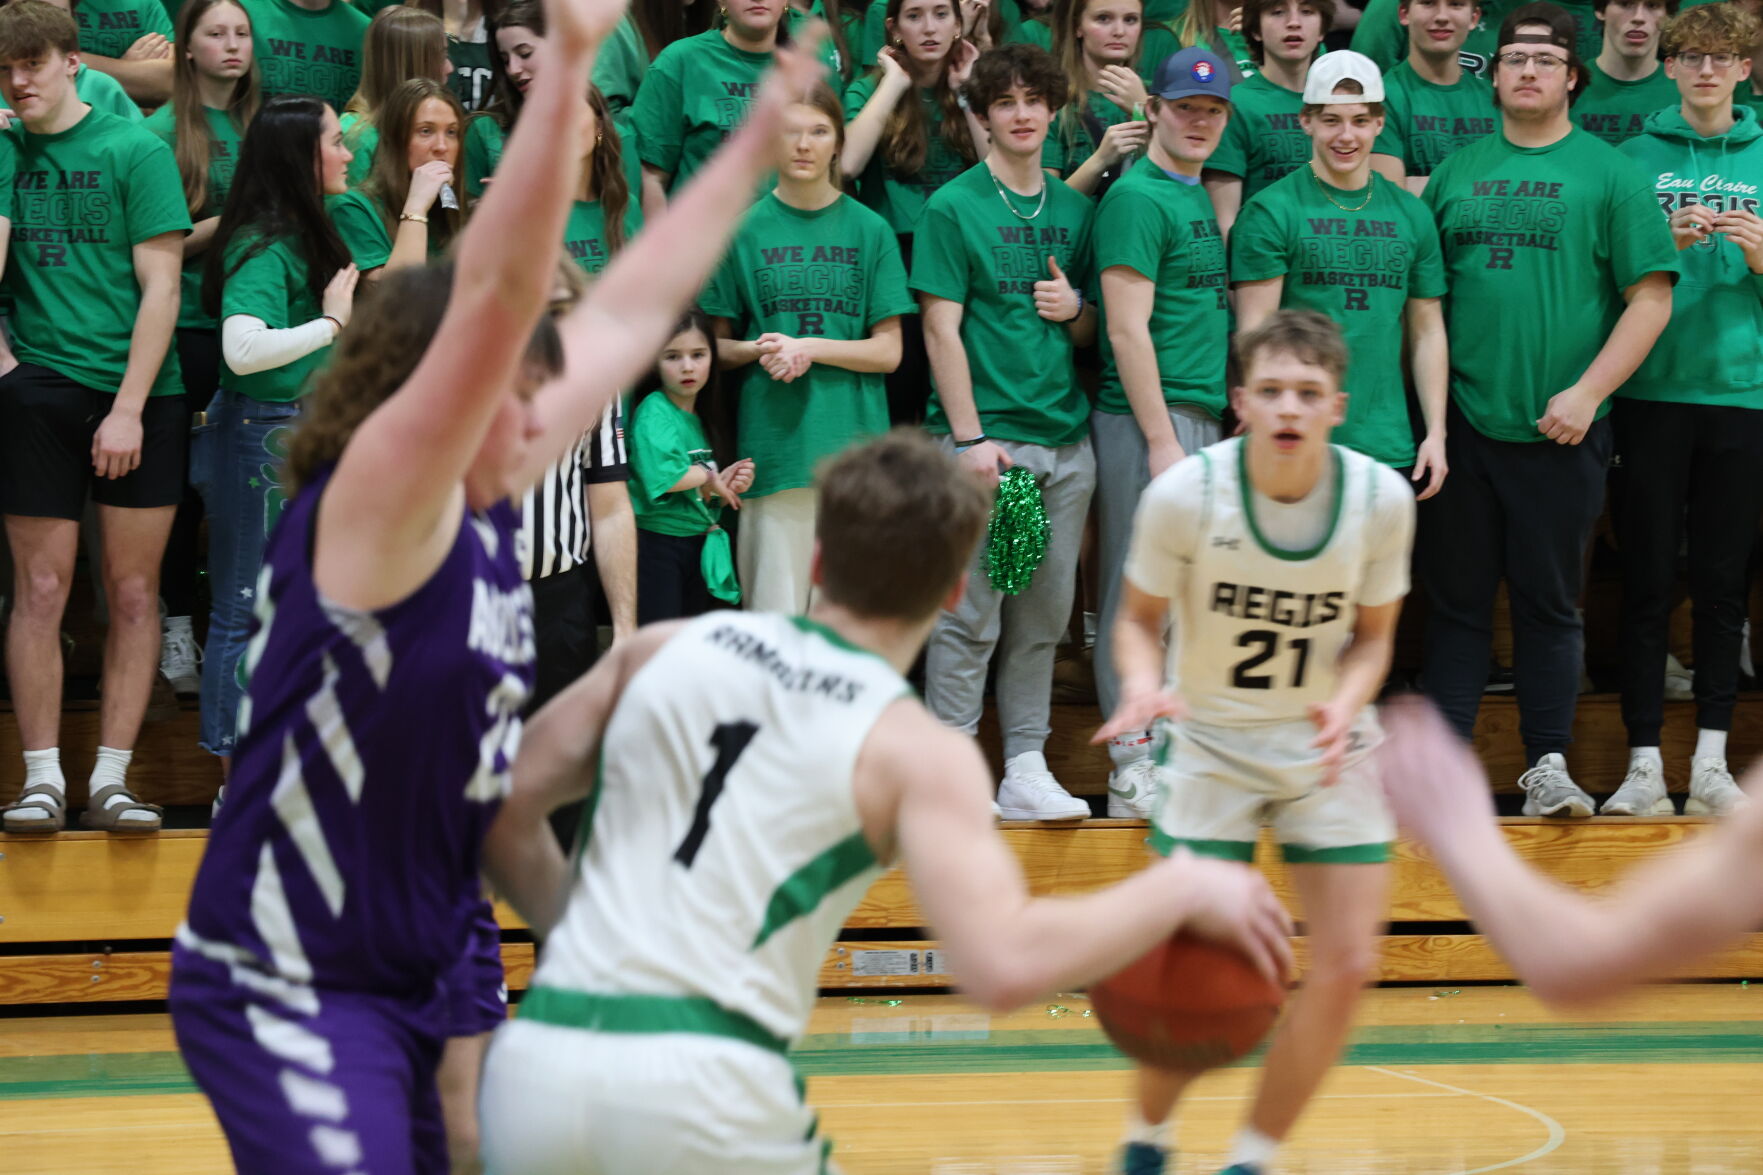 Regis Ramblers Dominate Augusta With Convincing 78-38 Victory in Boys Basketball Regional Quarterfinals